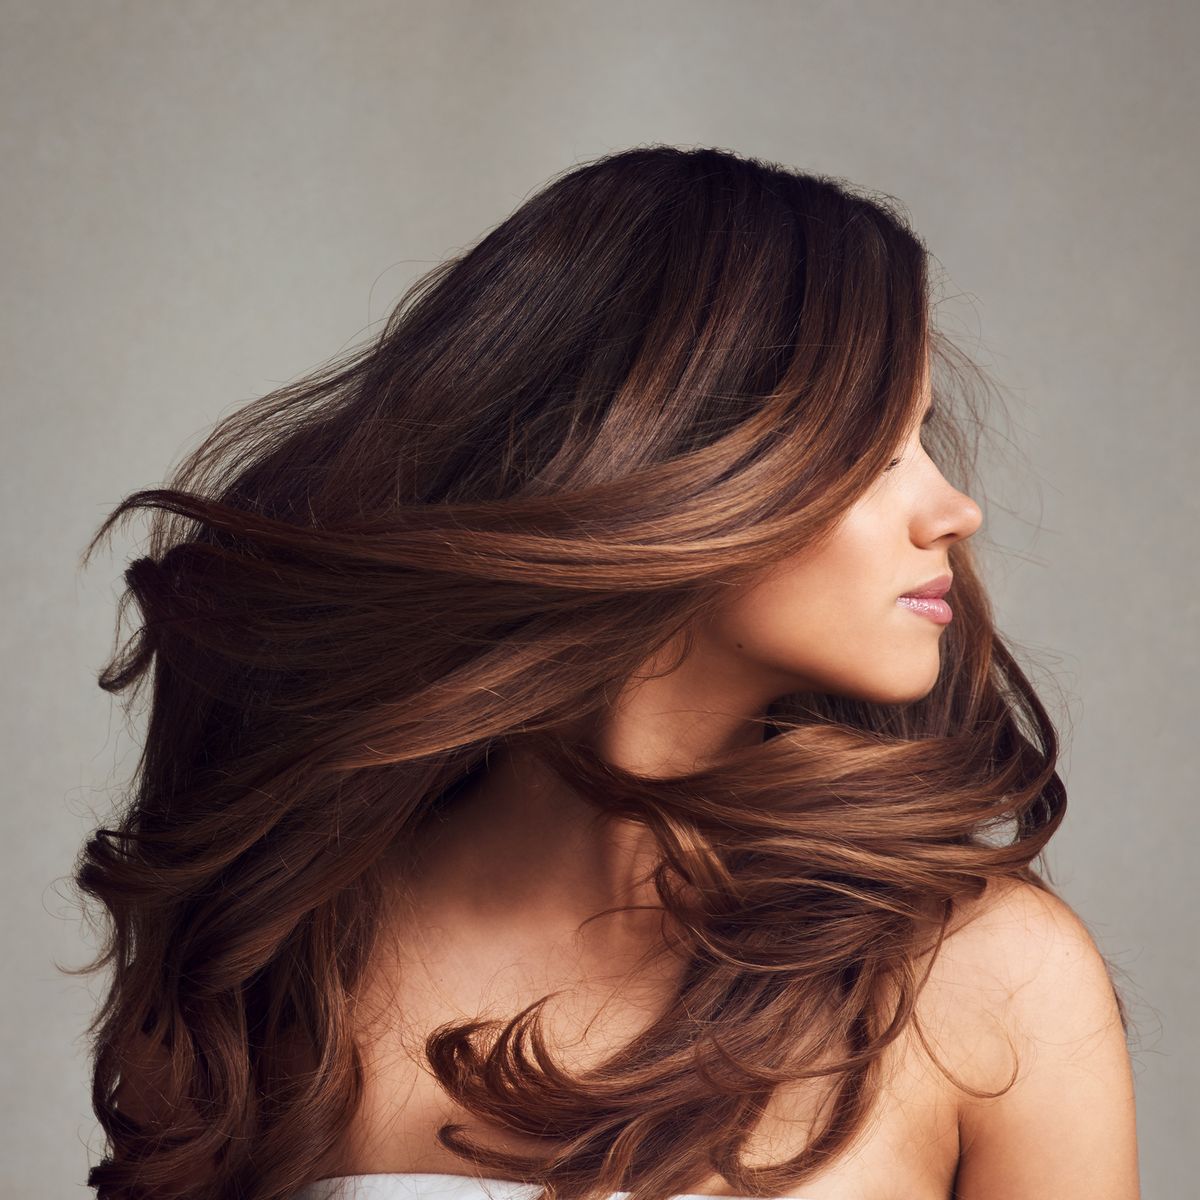 How to Shampoo: 10 Expert Tips to Know